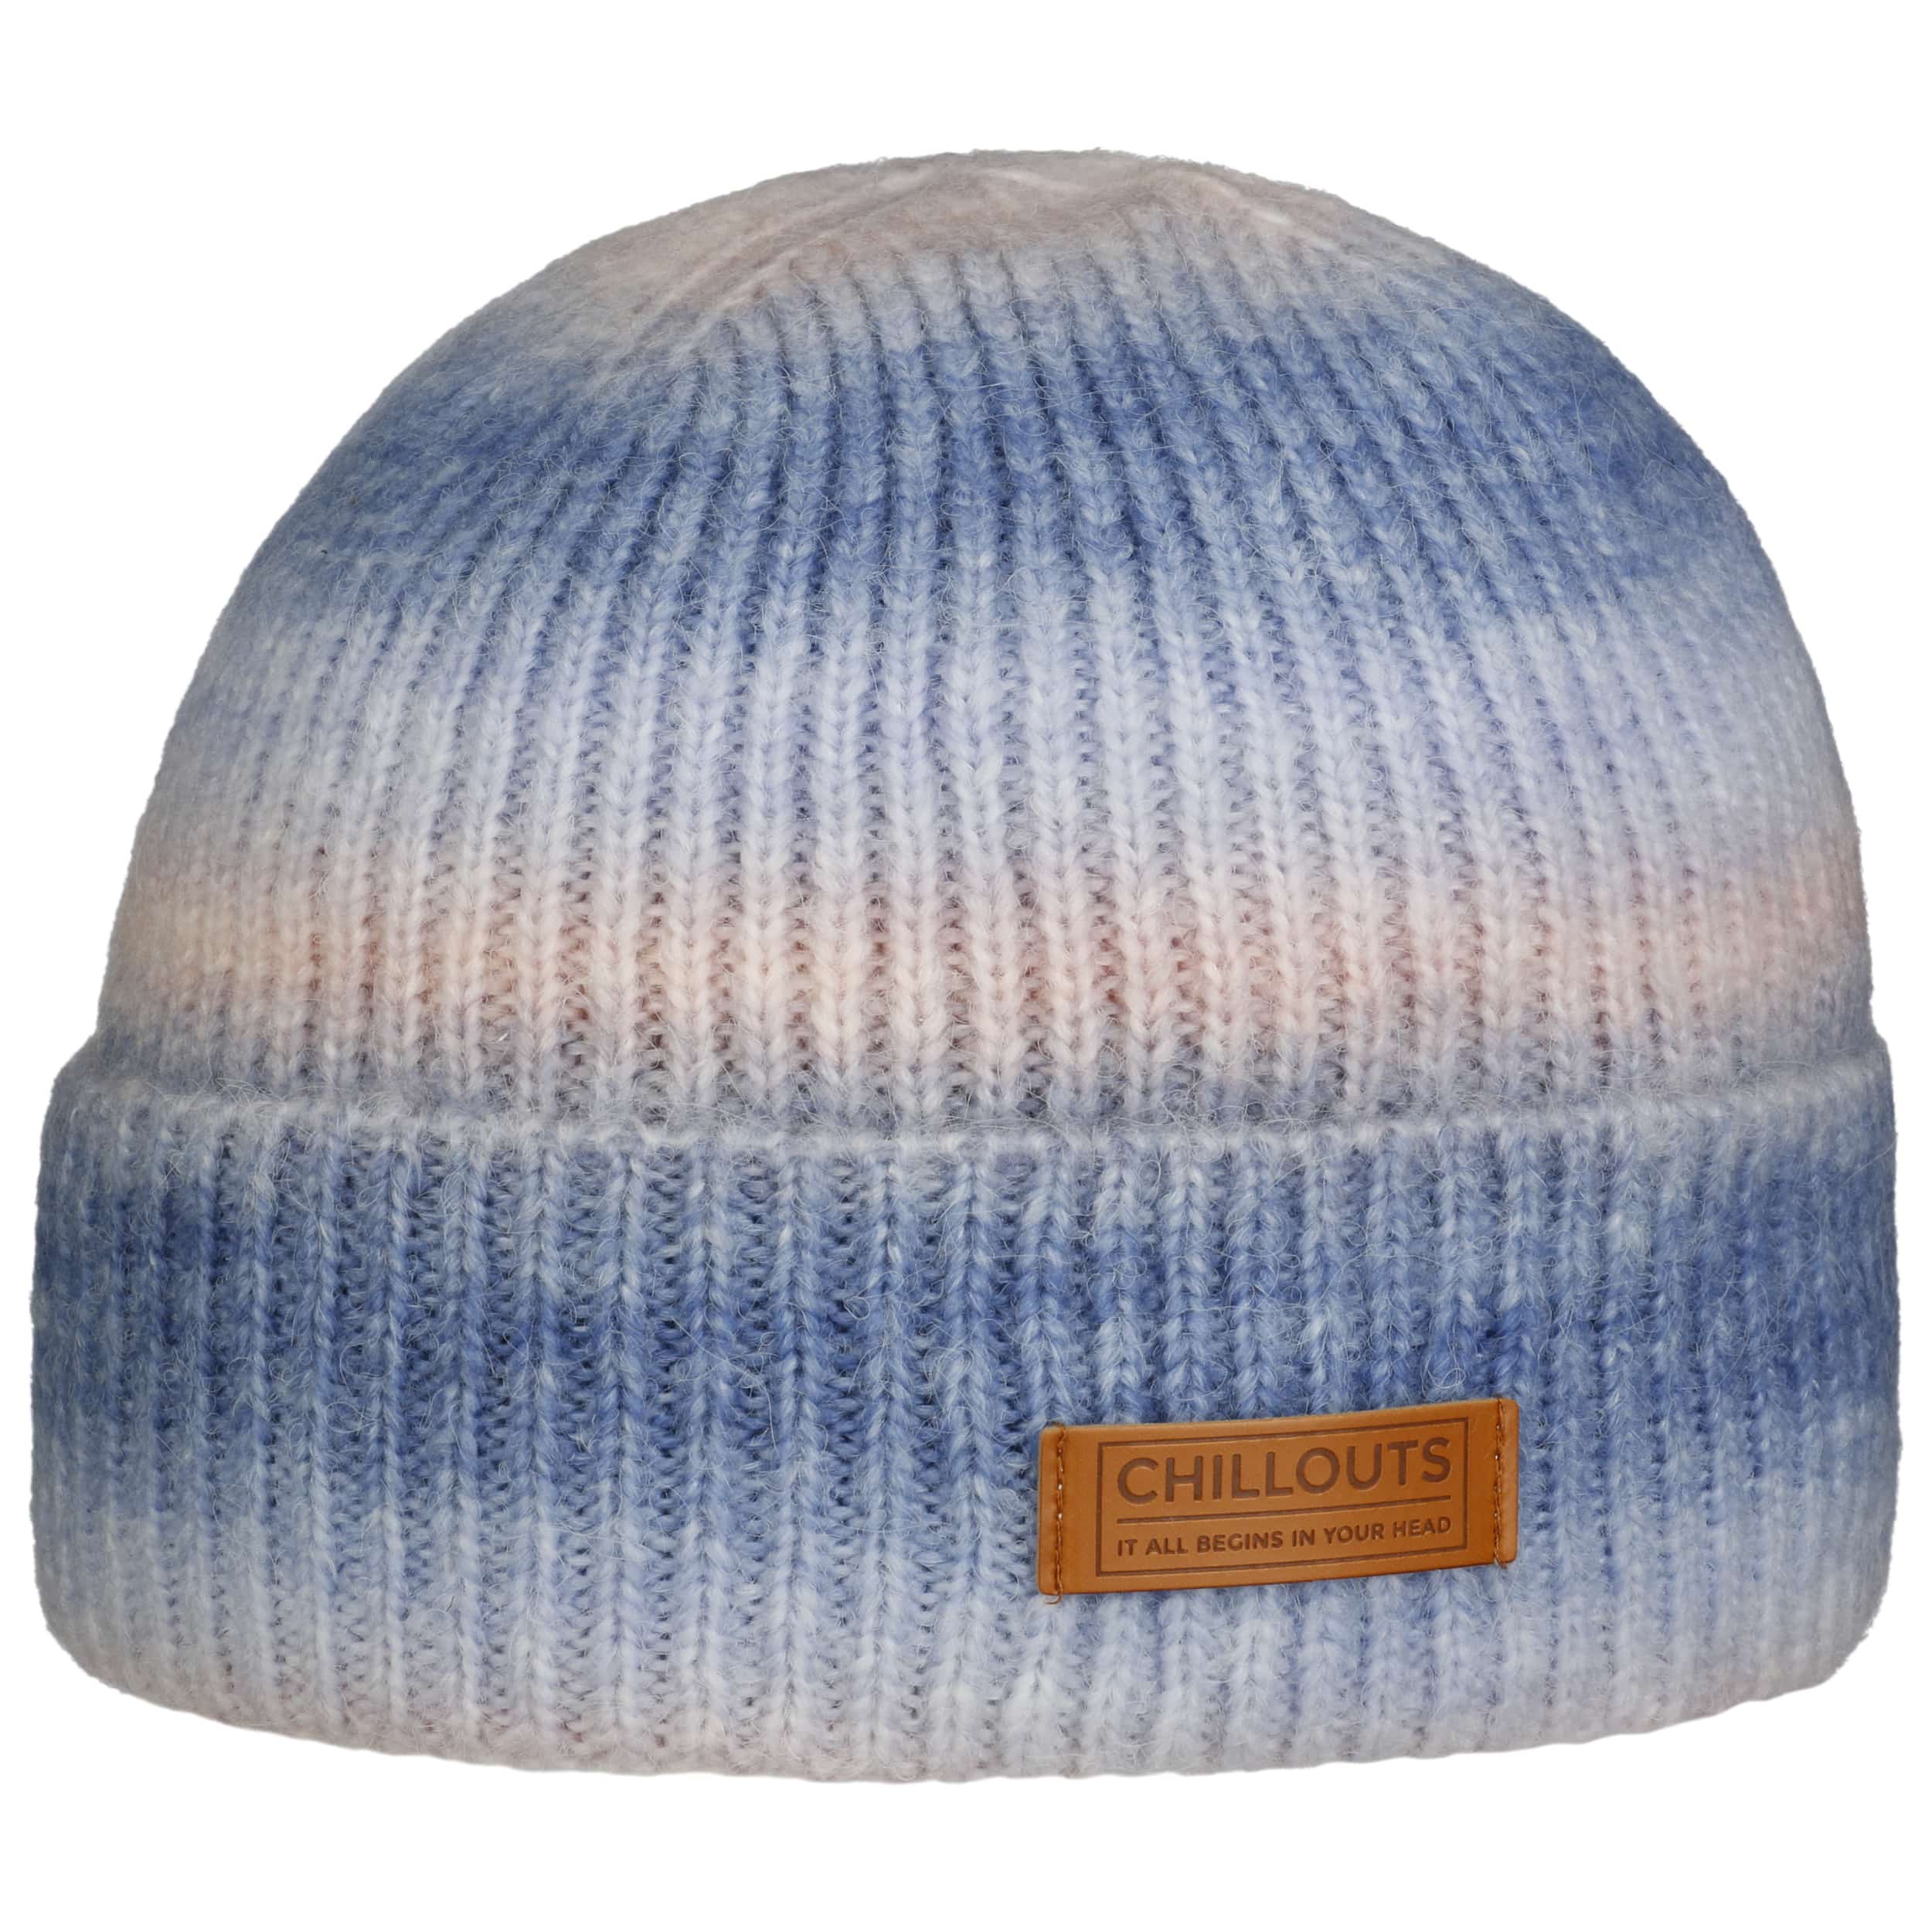 Rainbow Beanie Hat by Chillouts - 23,95 £